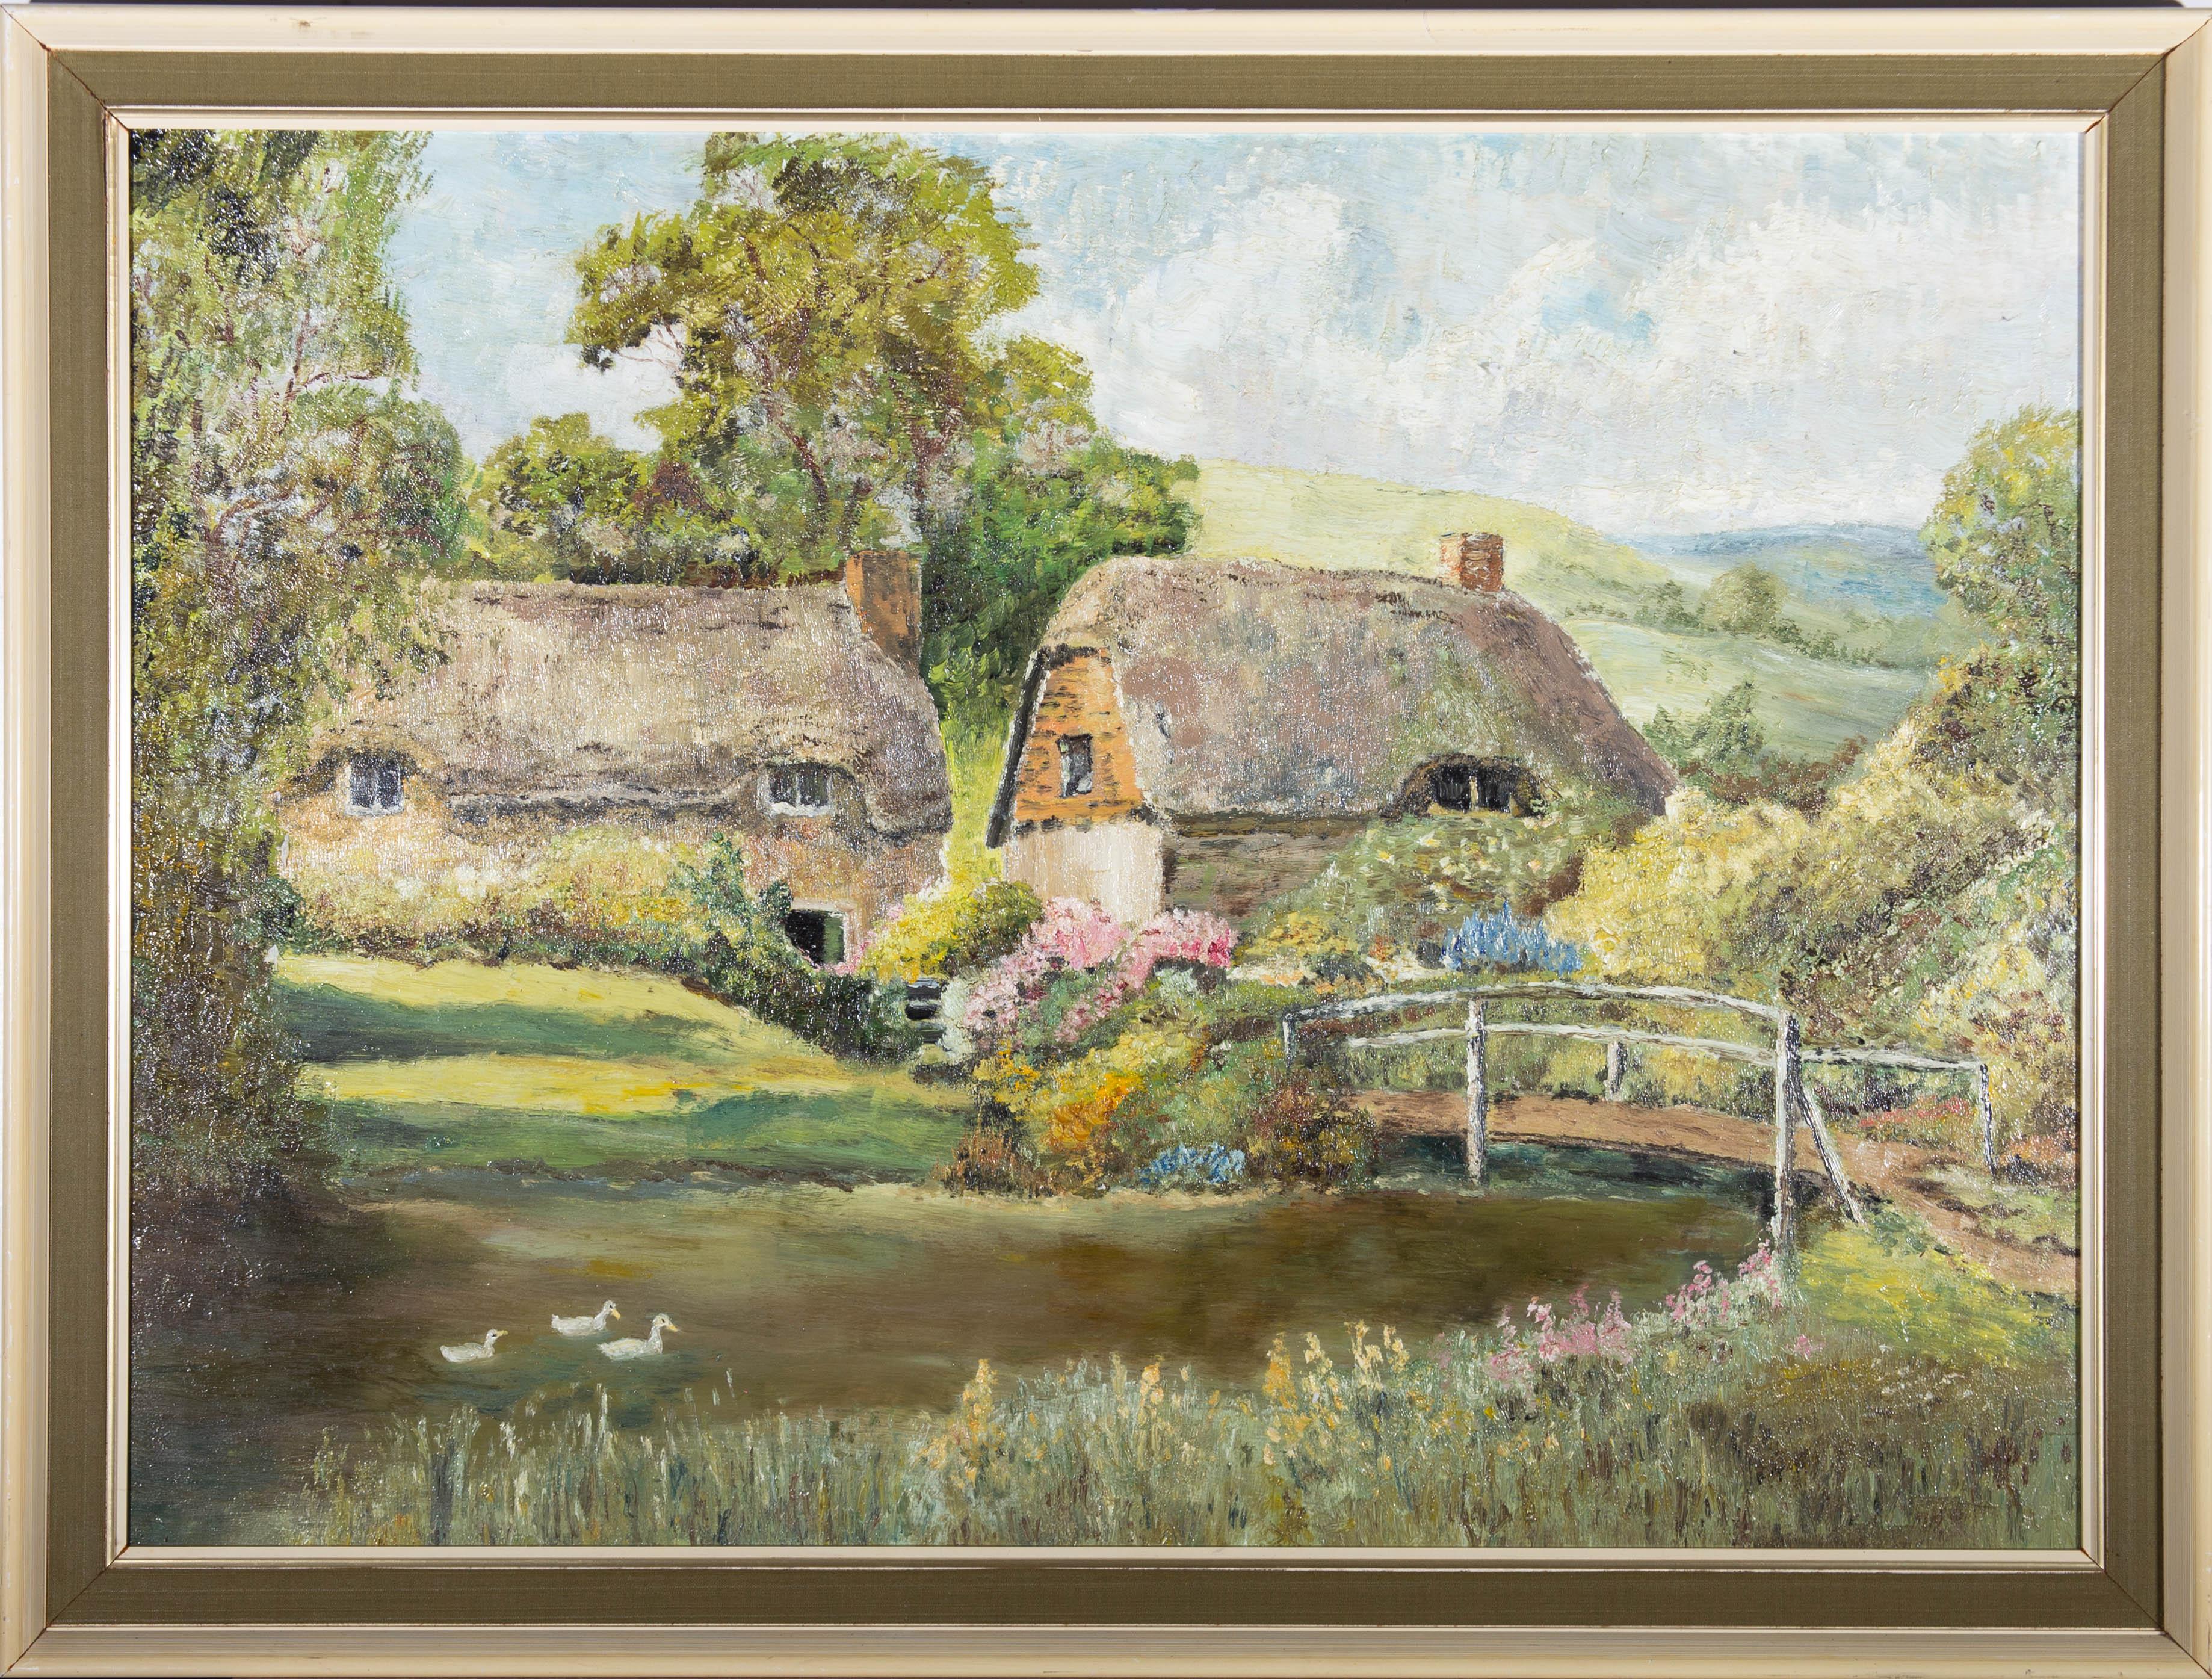 Unknown Landscape Painting - 20th Century Oil - Cottages by the Pond